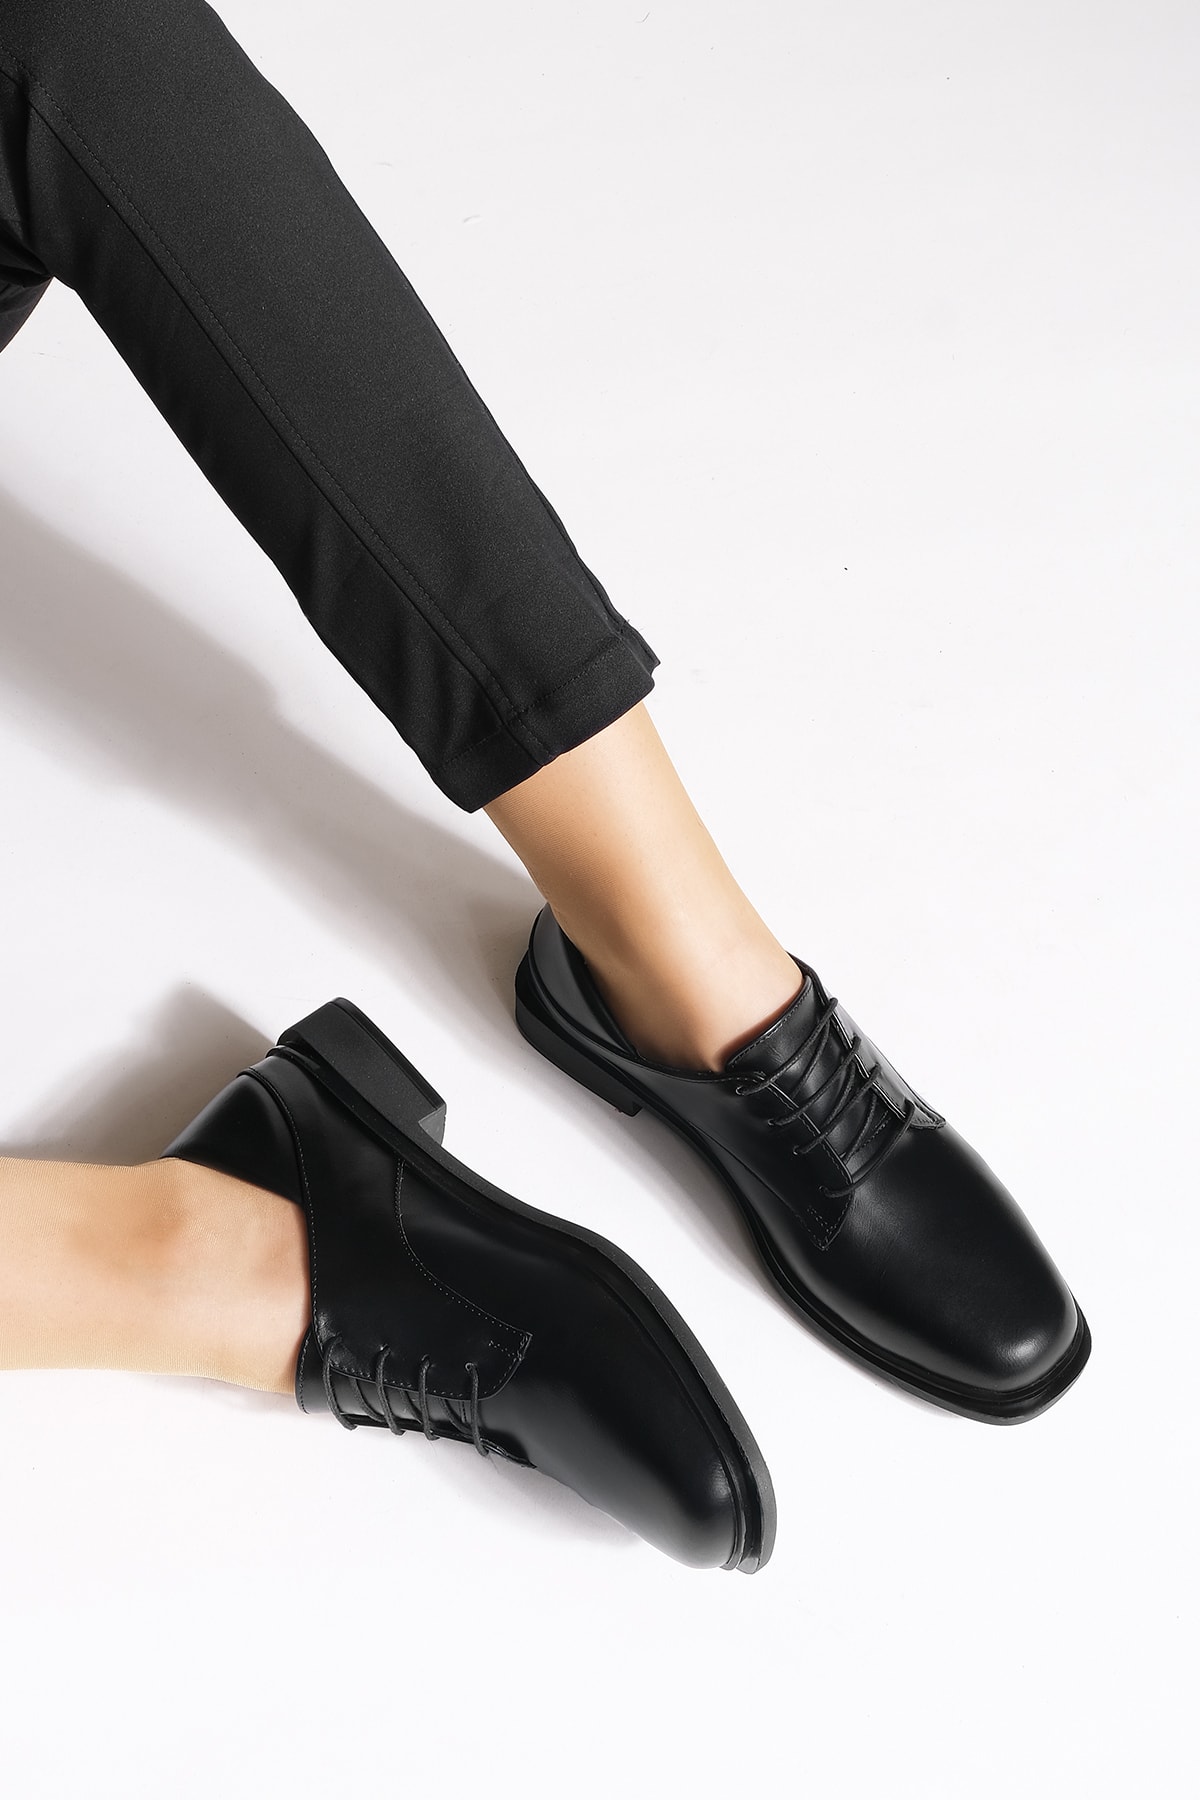 Levně Marjin Women's Oxford Shoes Boots with Lace-up Masculinity Casual Shoes Rilen Black.